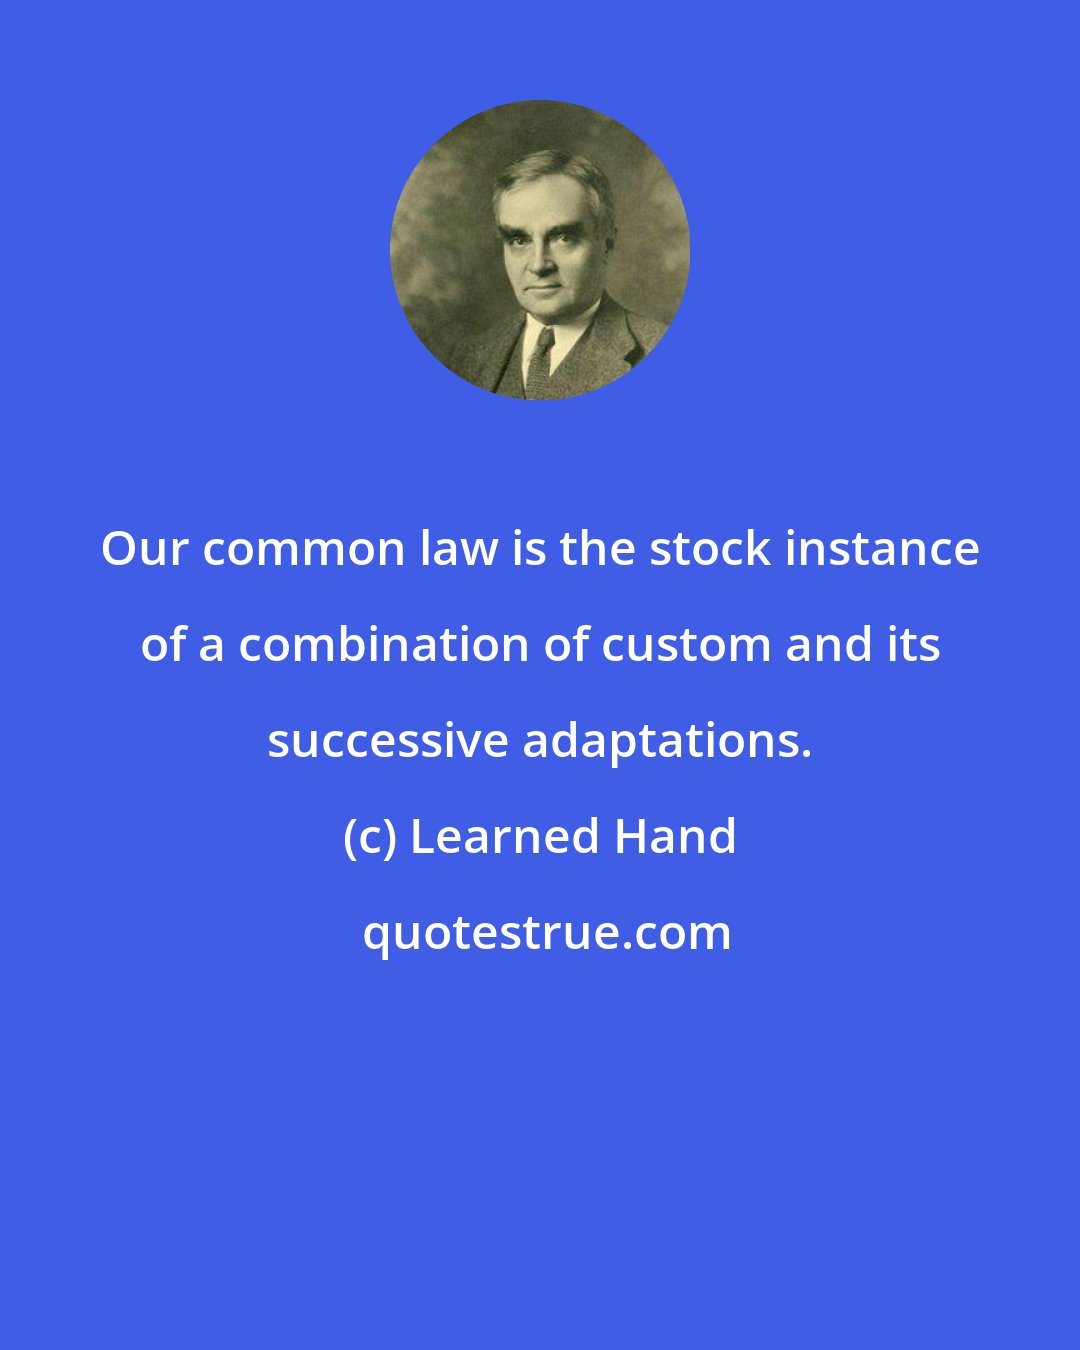 Learned Hand: Our common law is the stock instance of a combination of custom and its successive adaptations.